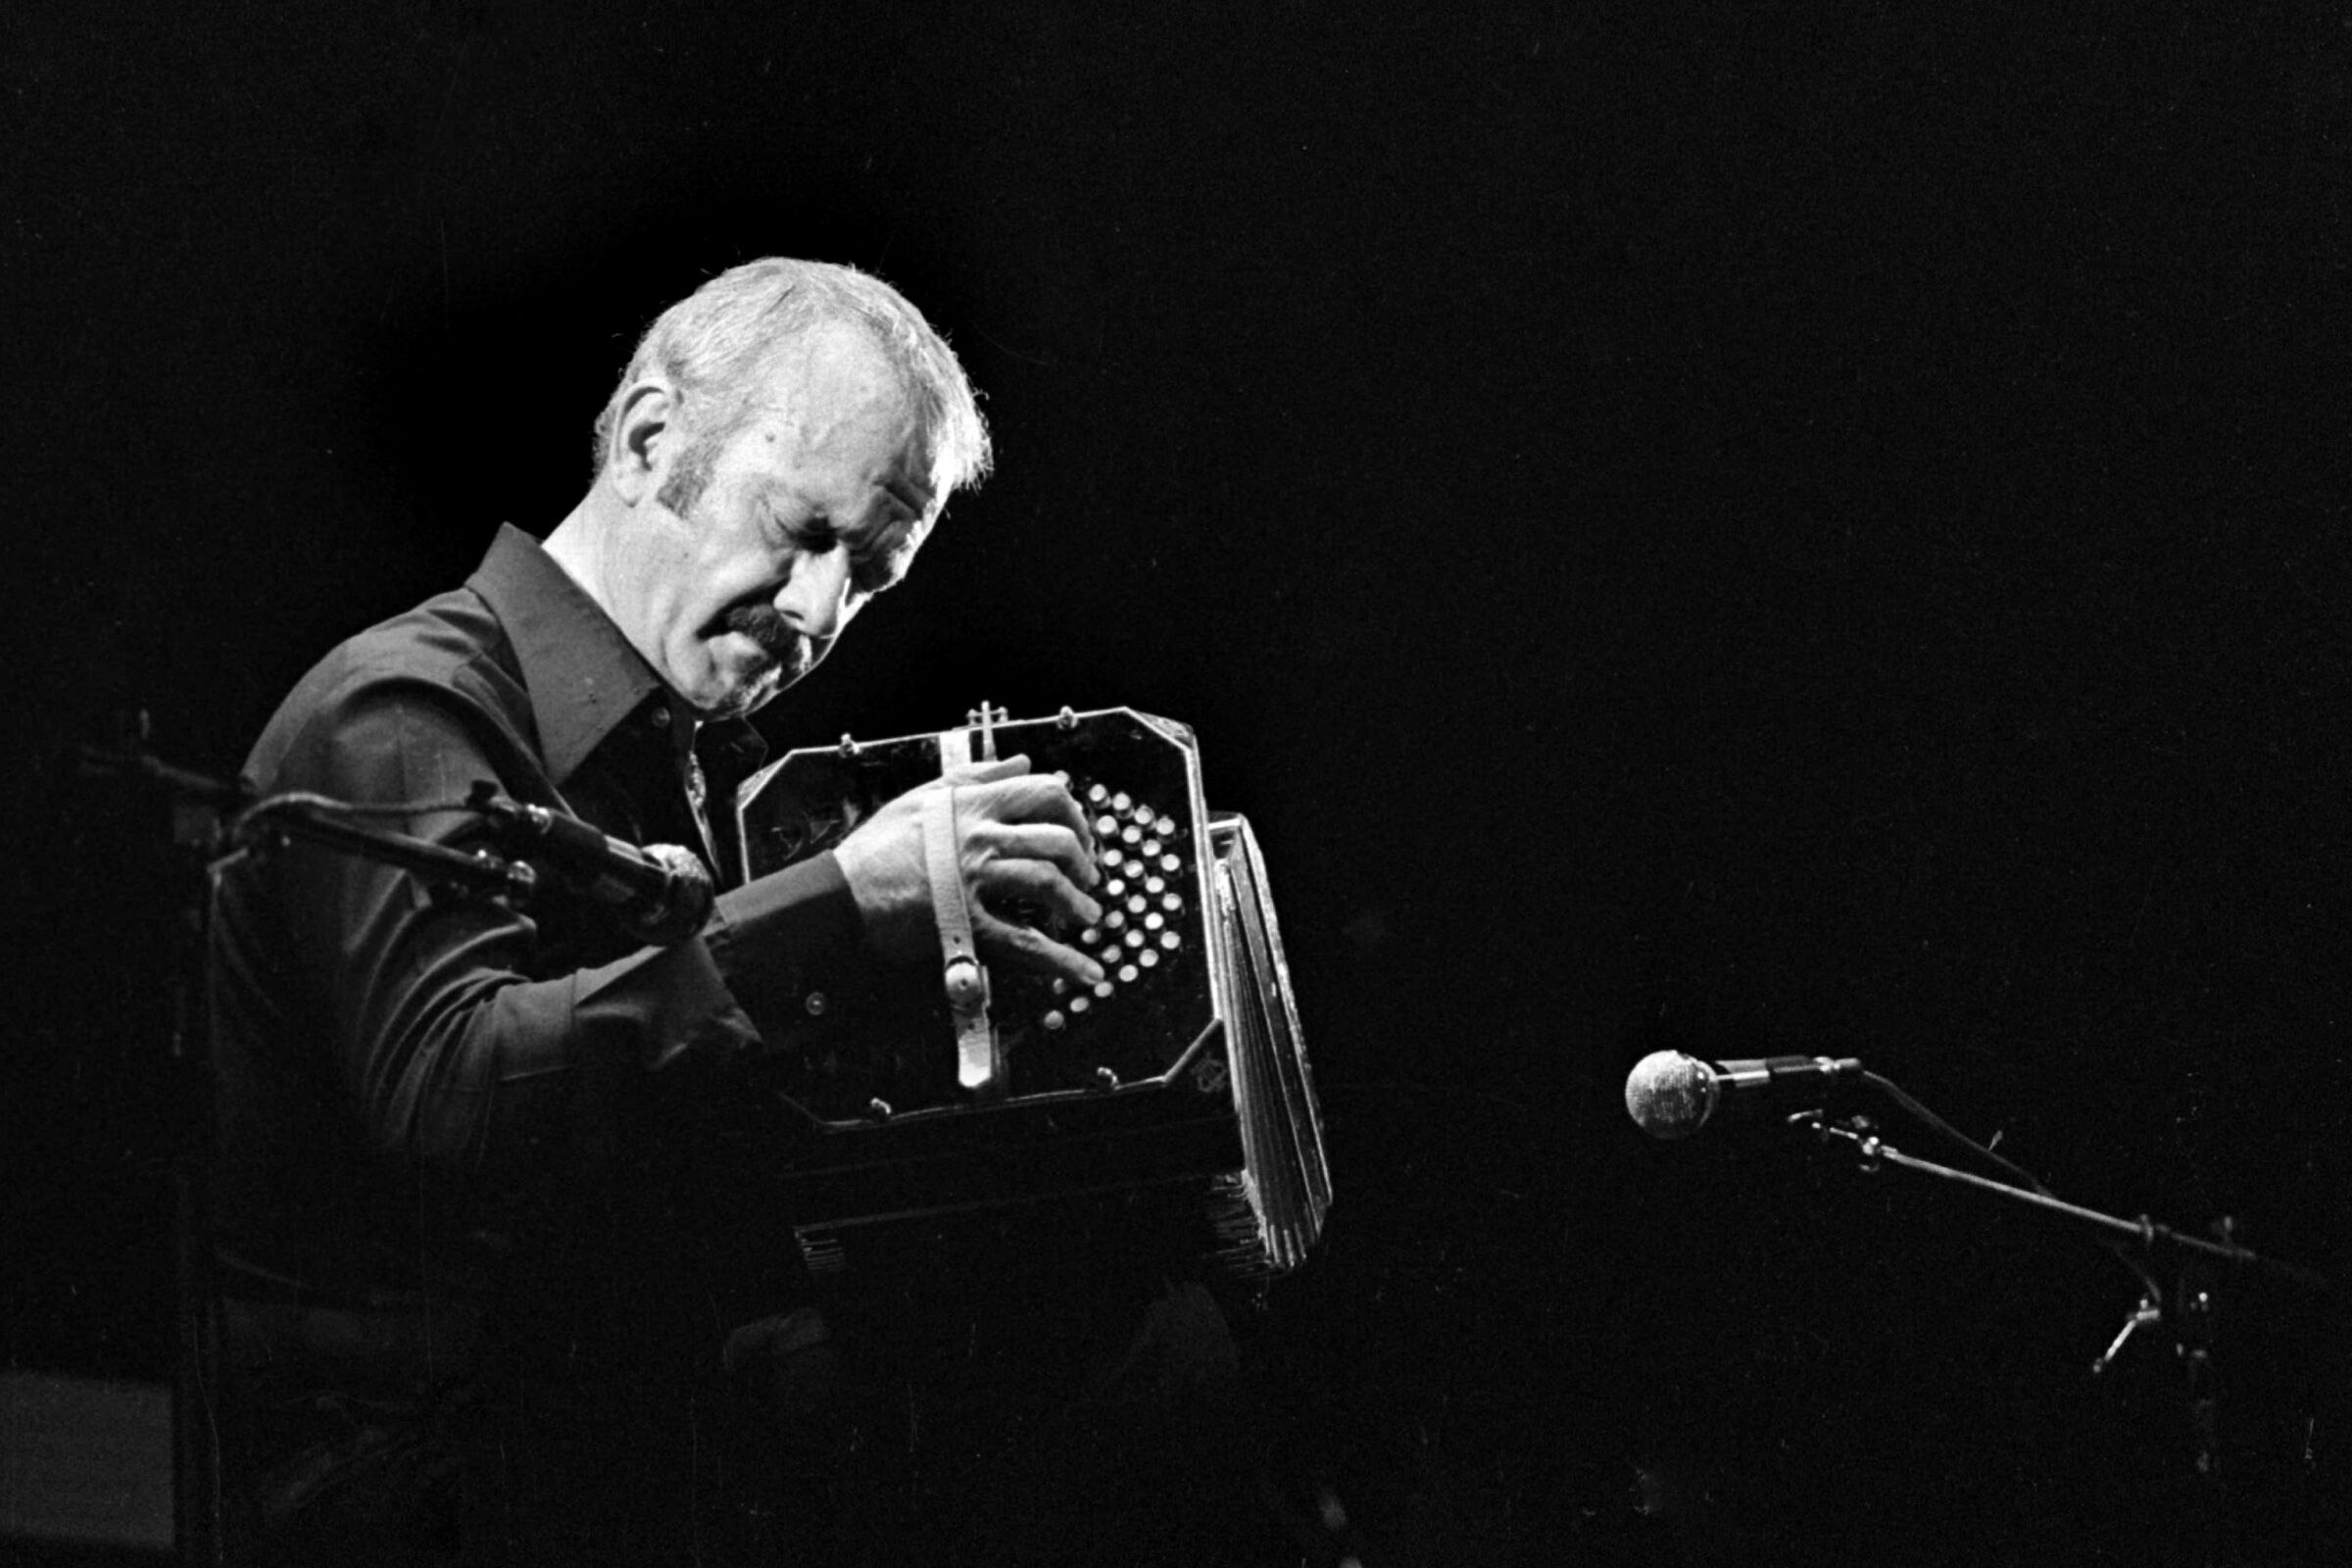 Astor Piazzolla plays the bandoneón.